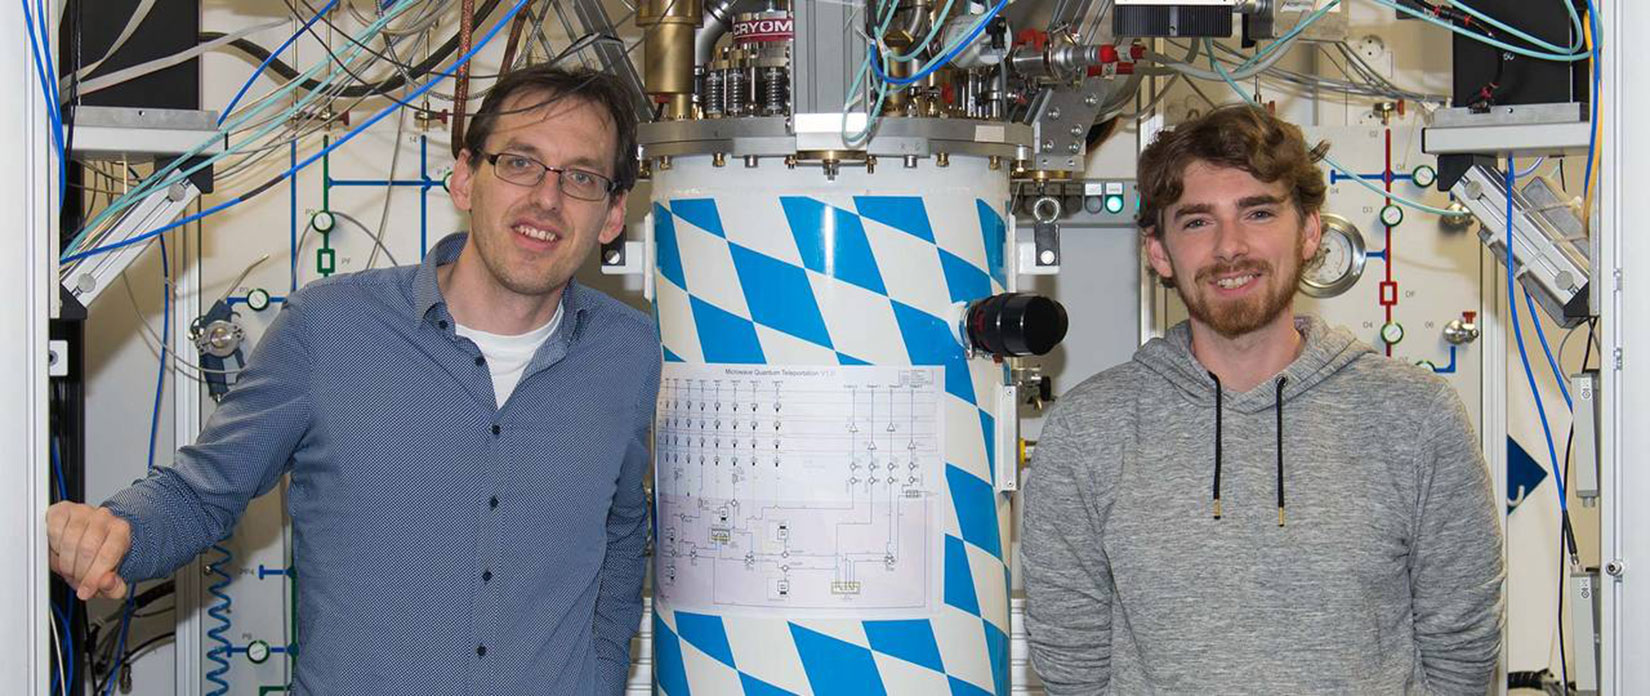 First author Stefan Pogorzalek (r) and co-author Dr. Frank Deppe with the cryostat, in which they have realized a quantum LAN for the first time. Image: A. Battenberg / TUM